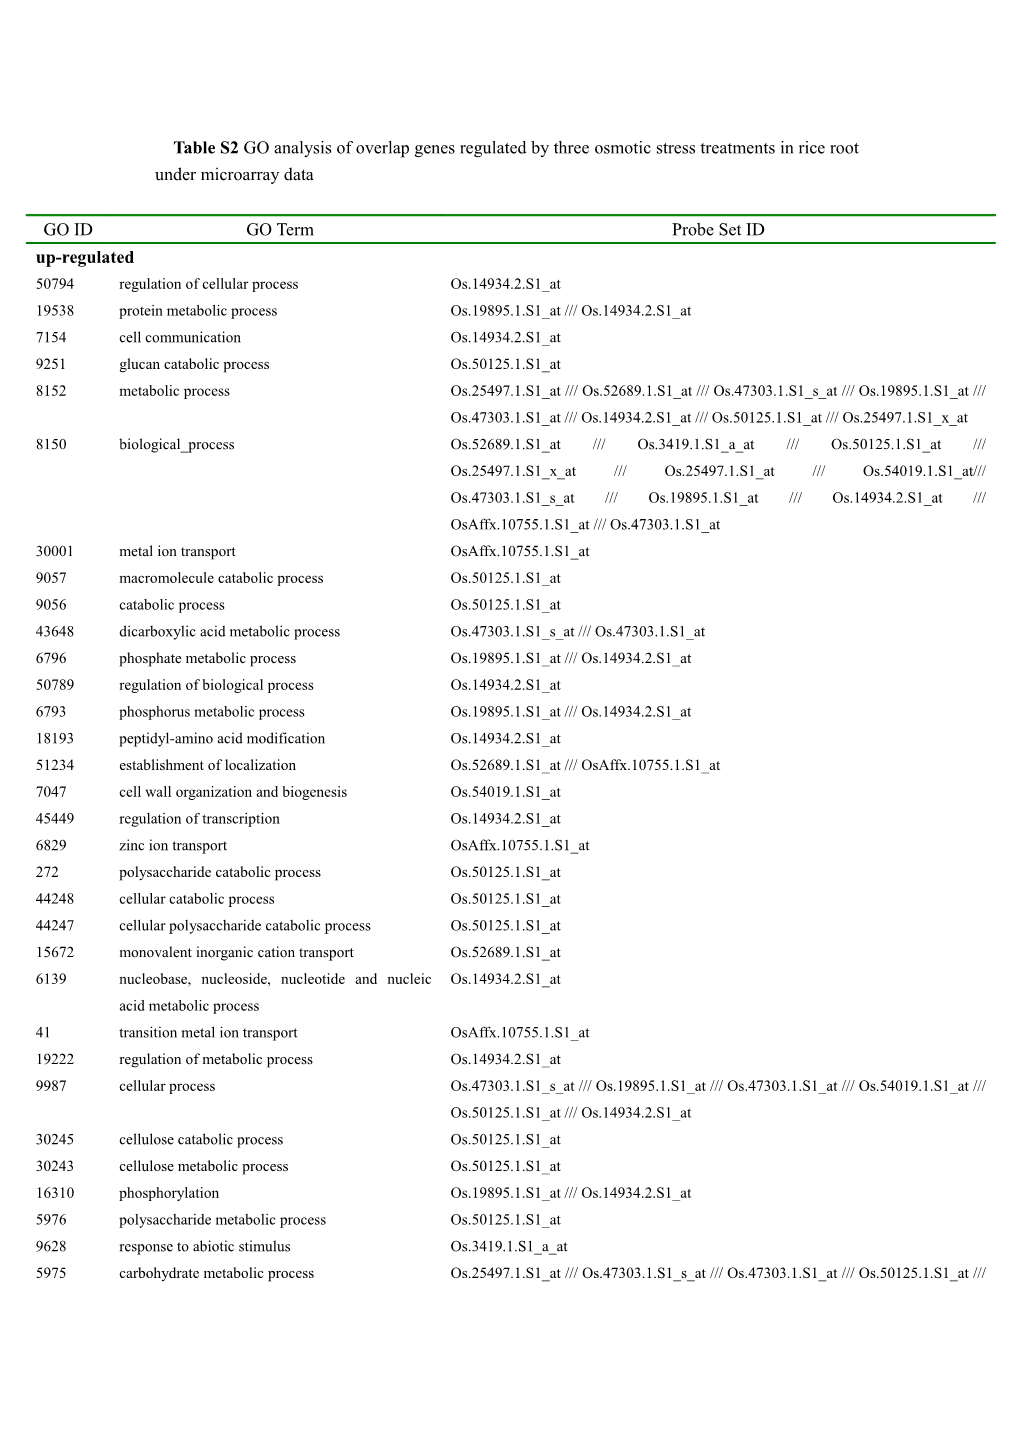 Table 2 GO Analysis to Regulated Overlap Genes of 3 Drought Stress Treatment in Root